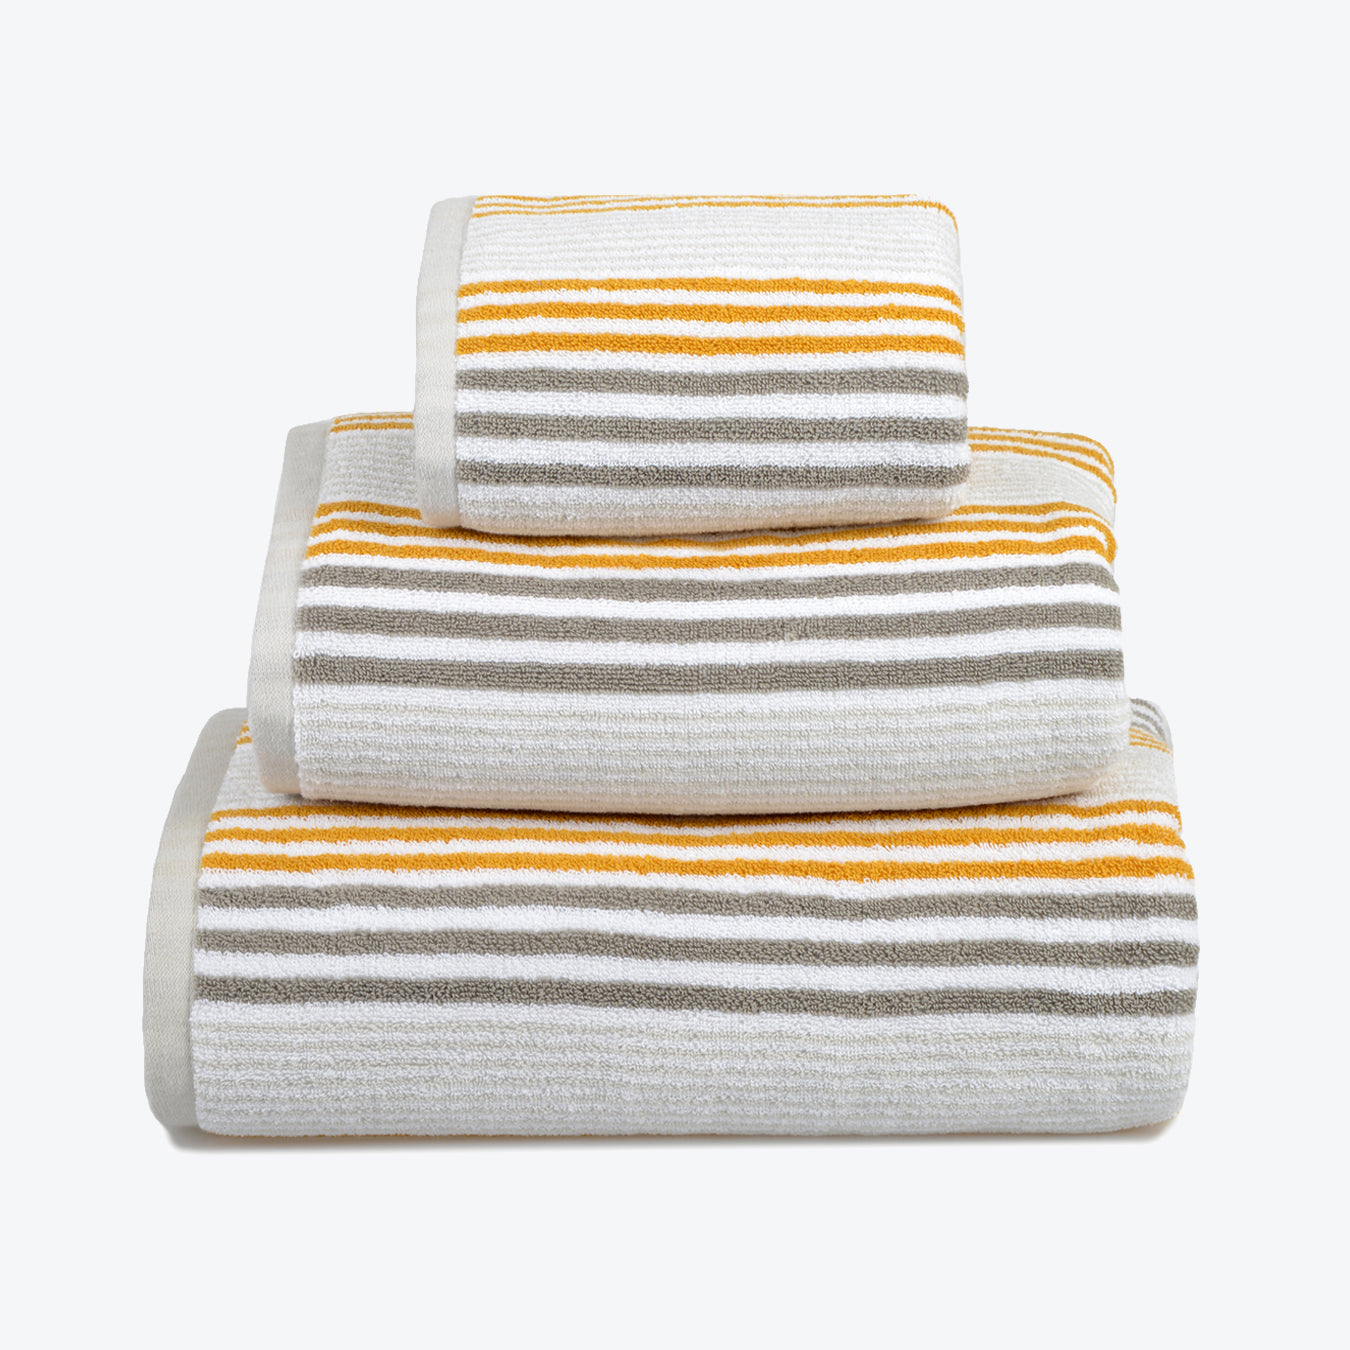 Grey/White/Mustard Striped Bathroom Towels - Mustard Yellow Patterned Towels